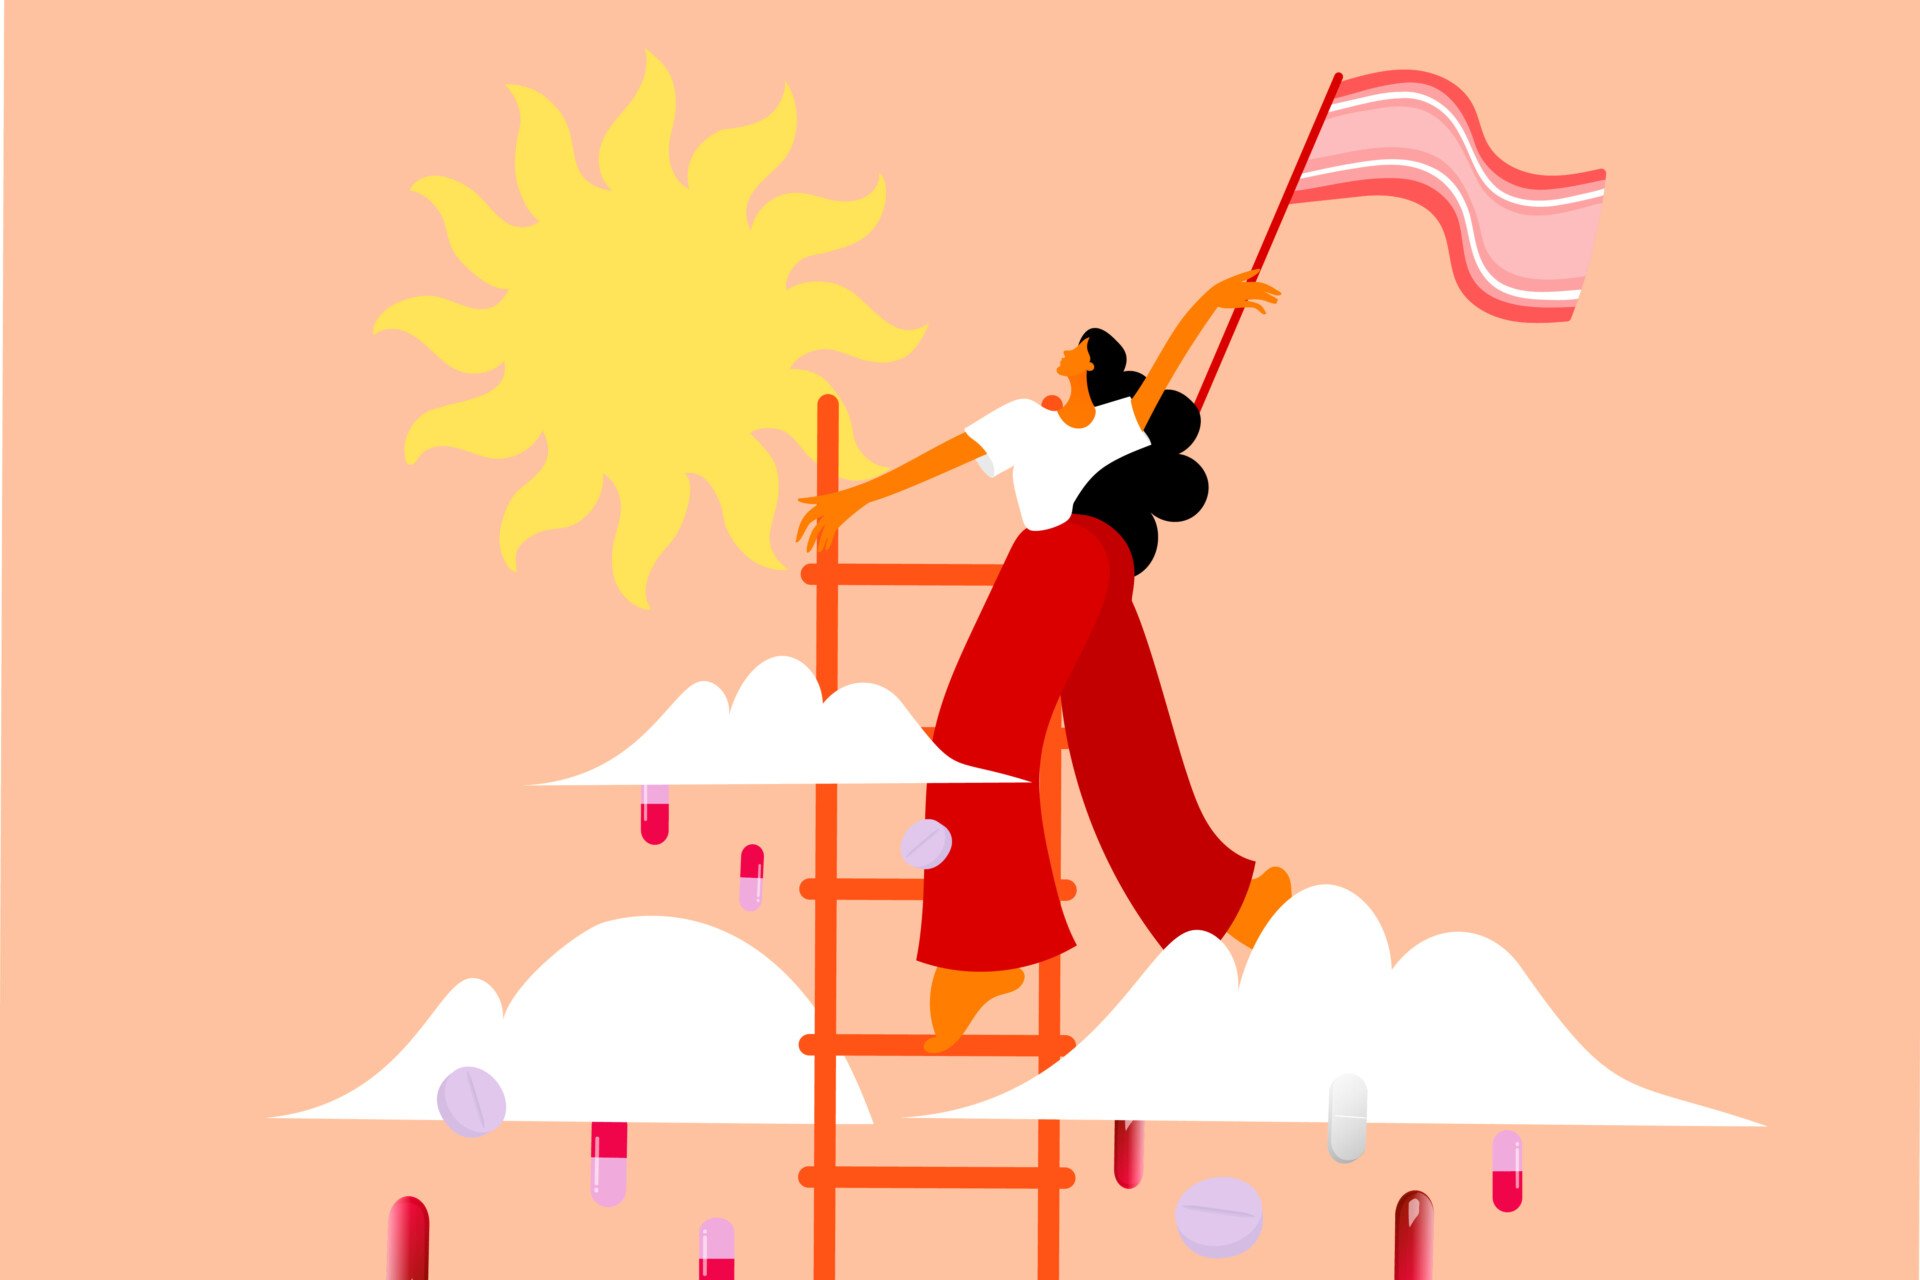 Illustration of a woman climbing a ladder through the clouds while waving a flag